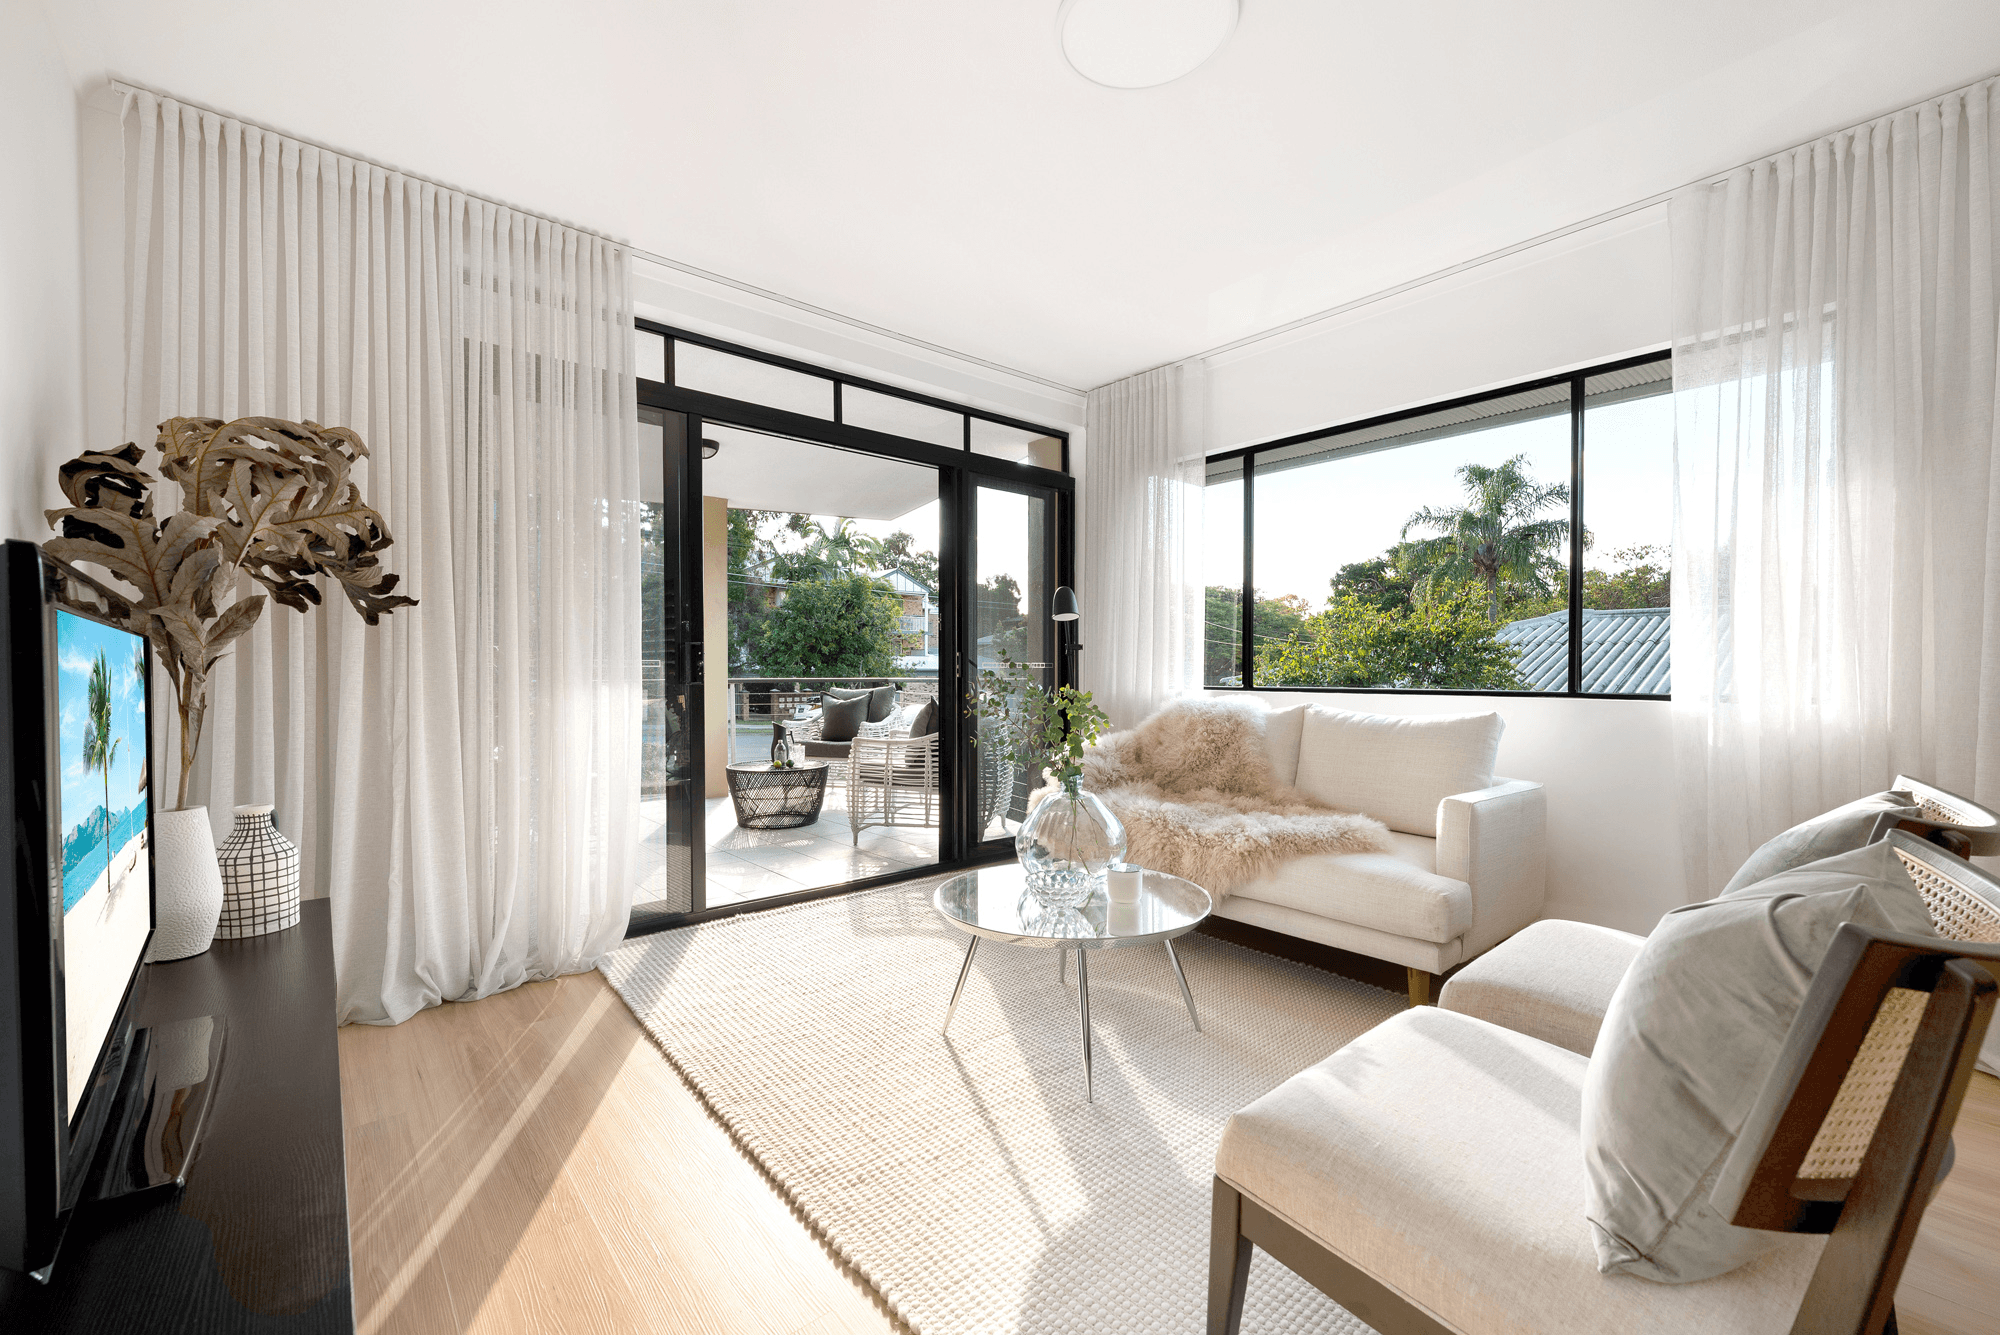 3/120 Central Avenue, INDOOROOPILLY, QLD 4068